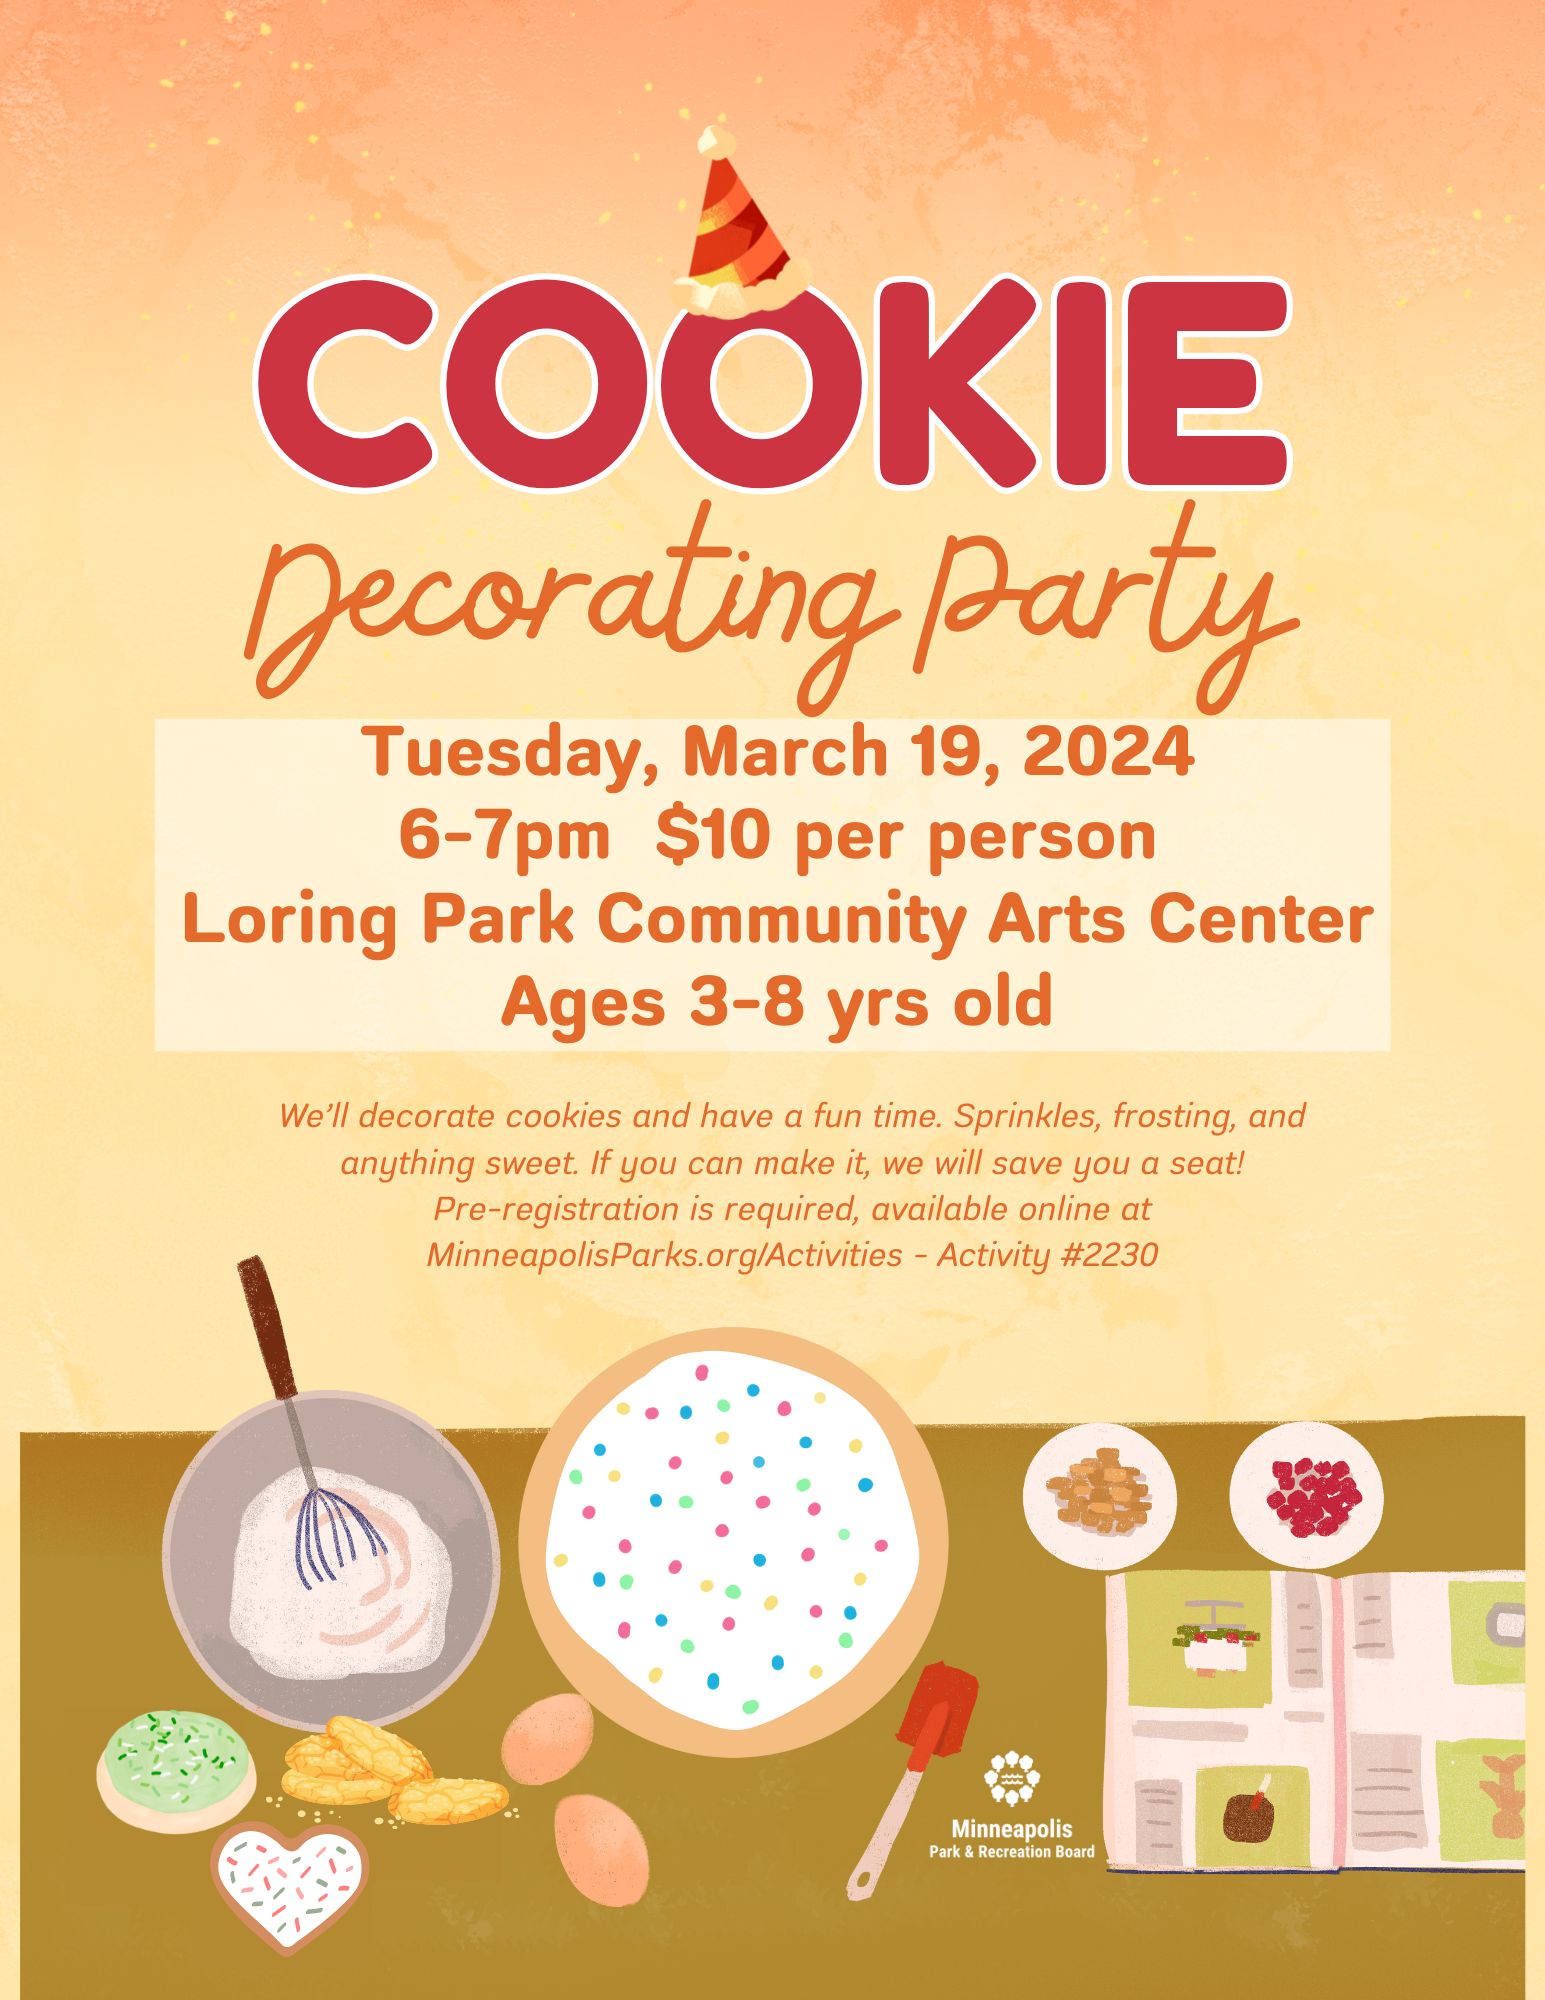 Cookie Decorating Party at Loring Park